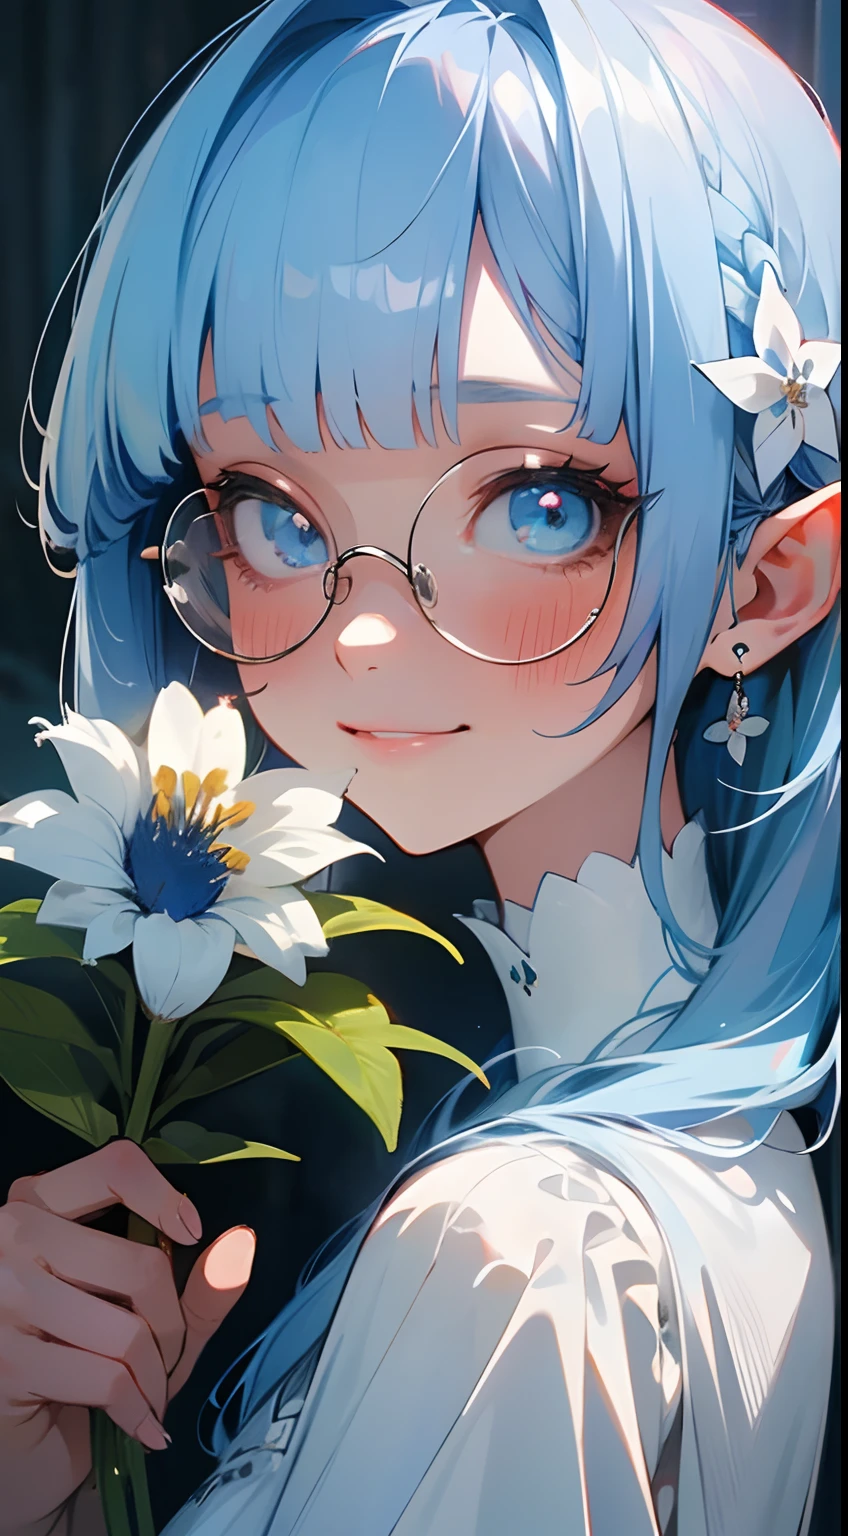 (masterpiece), best quality, a close up in a shy elf with a  holding a blue flower, holding, garden, flower,  she is wearing a white dress, cute girl, ((she is smiling, blushing, smile, holding flower)), cute eyes, (1girl, solo,alone), photorealistic, perfect shading, , detailed, realistic hair, (perfect face, expressive eyes), cool colors,delicious coffee, aromatic,, (innocent,feimine, gentle, soft), blue flower 

BREAK her hair is light blue, blunt bangs, long hair expressive eyes, perfect face, circle-glasses, light_blue_hair 

BREAK ( white dress:1.3), (light_blue_hair:1.3),(blunt bangs:1.3),

BREAK vivid colors, perfect lighting, professional image, 4k, cuteness, soft, good emotions,